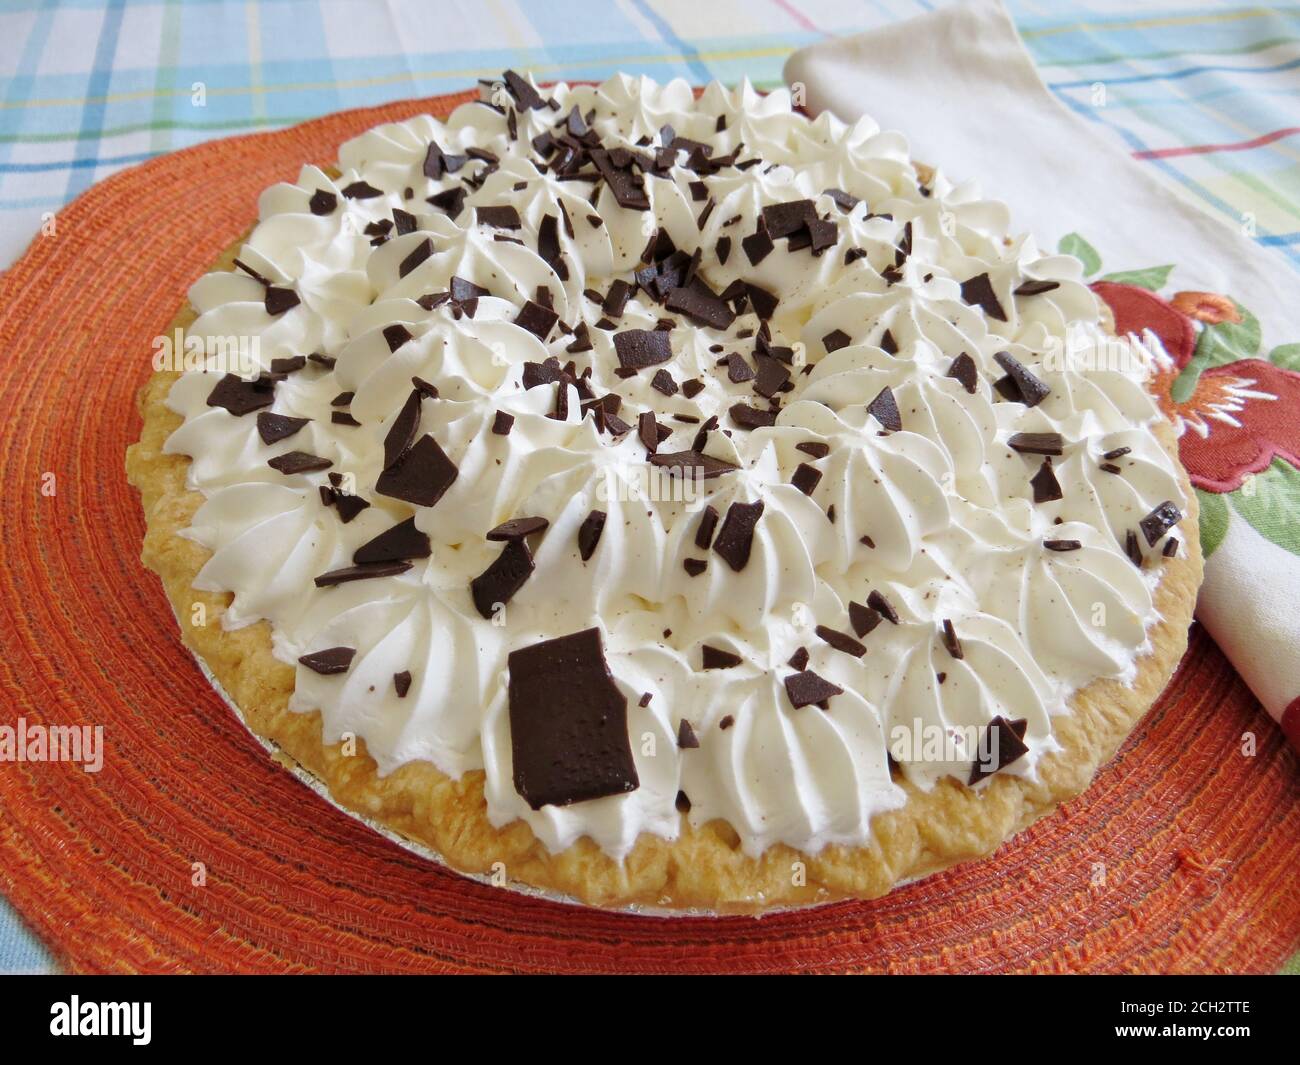 Chocolate pie  with whipped cream topping and chocolate shavings Stock Photo